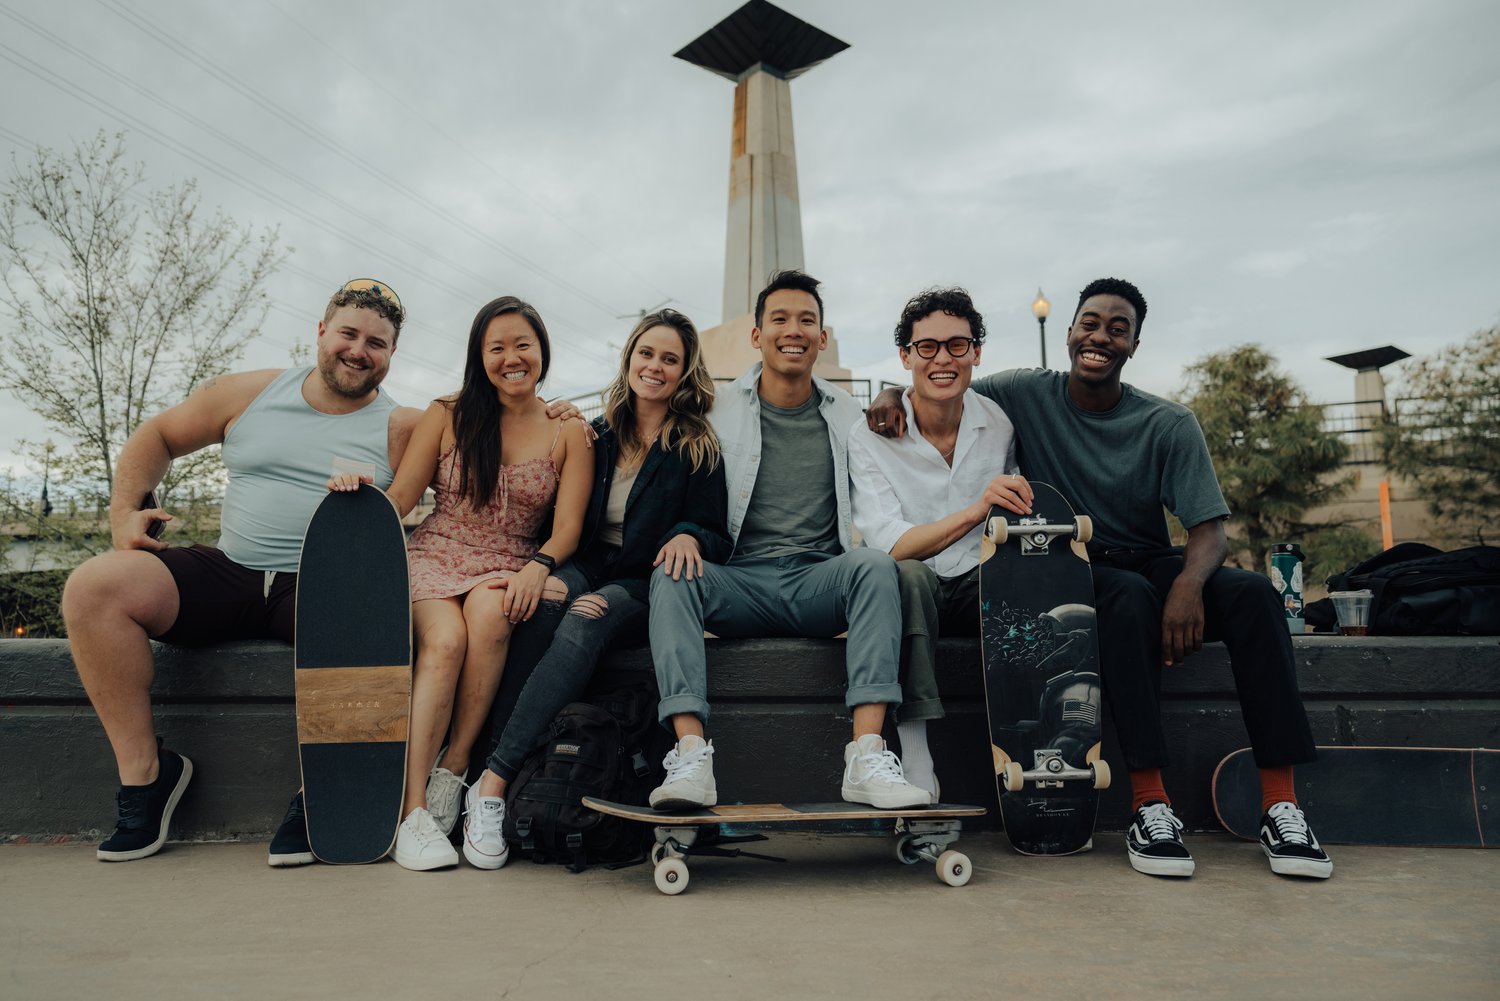 How an Instagram Ministry Connects Young Professionals to start Simple Churches in Denver